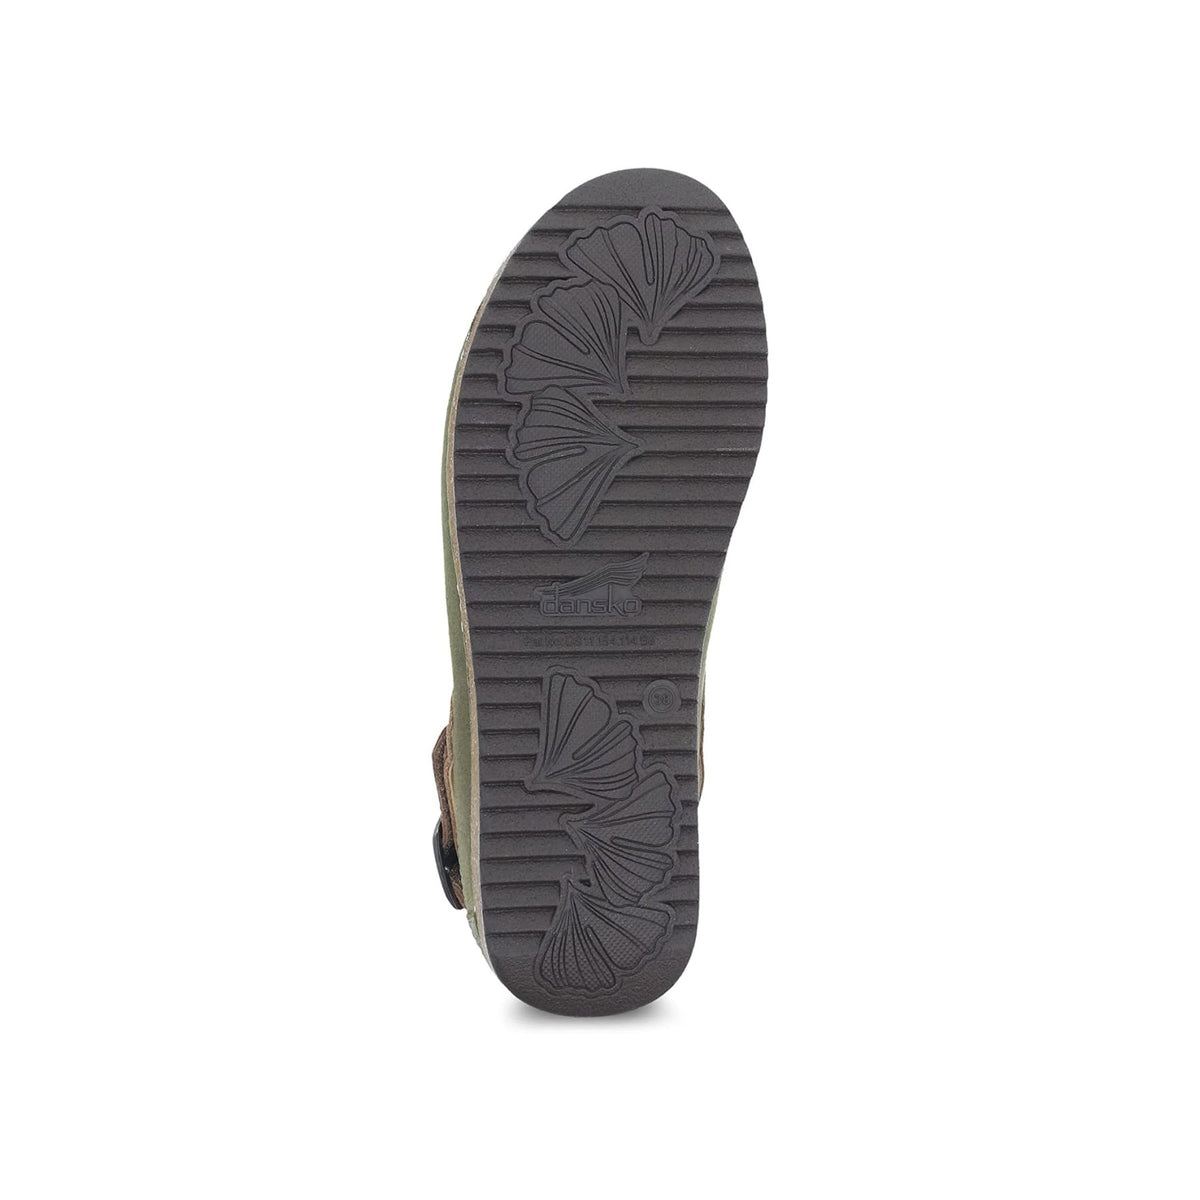 Bottom view of a single Dansko Merrin Olive shoe showing the tread pattern on a plain white background.